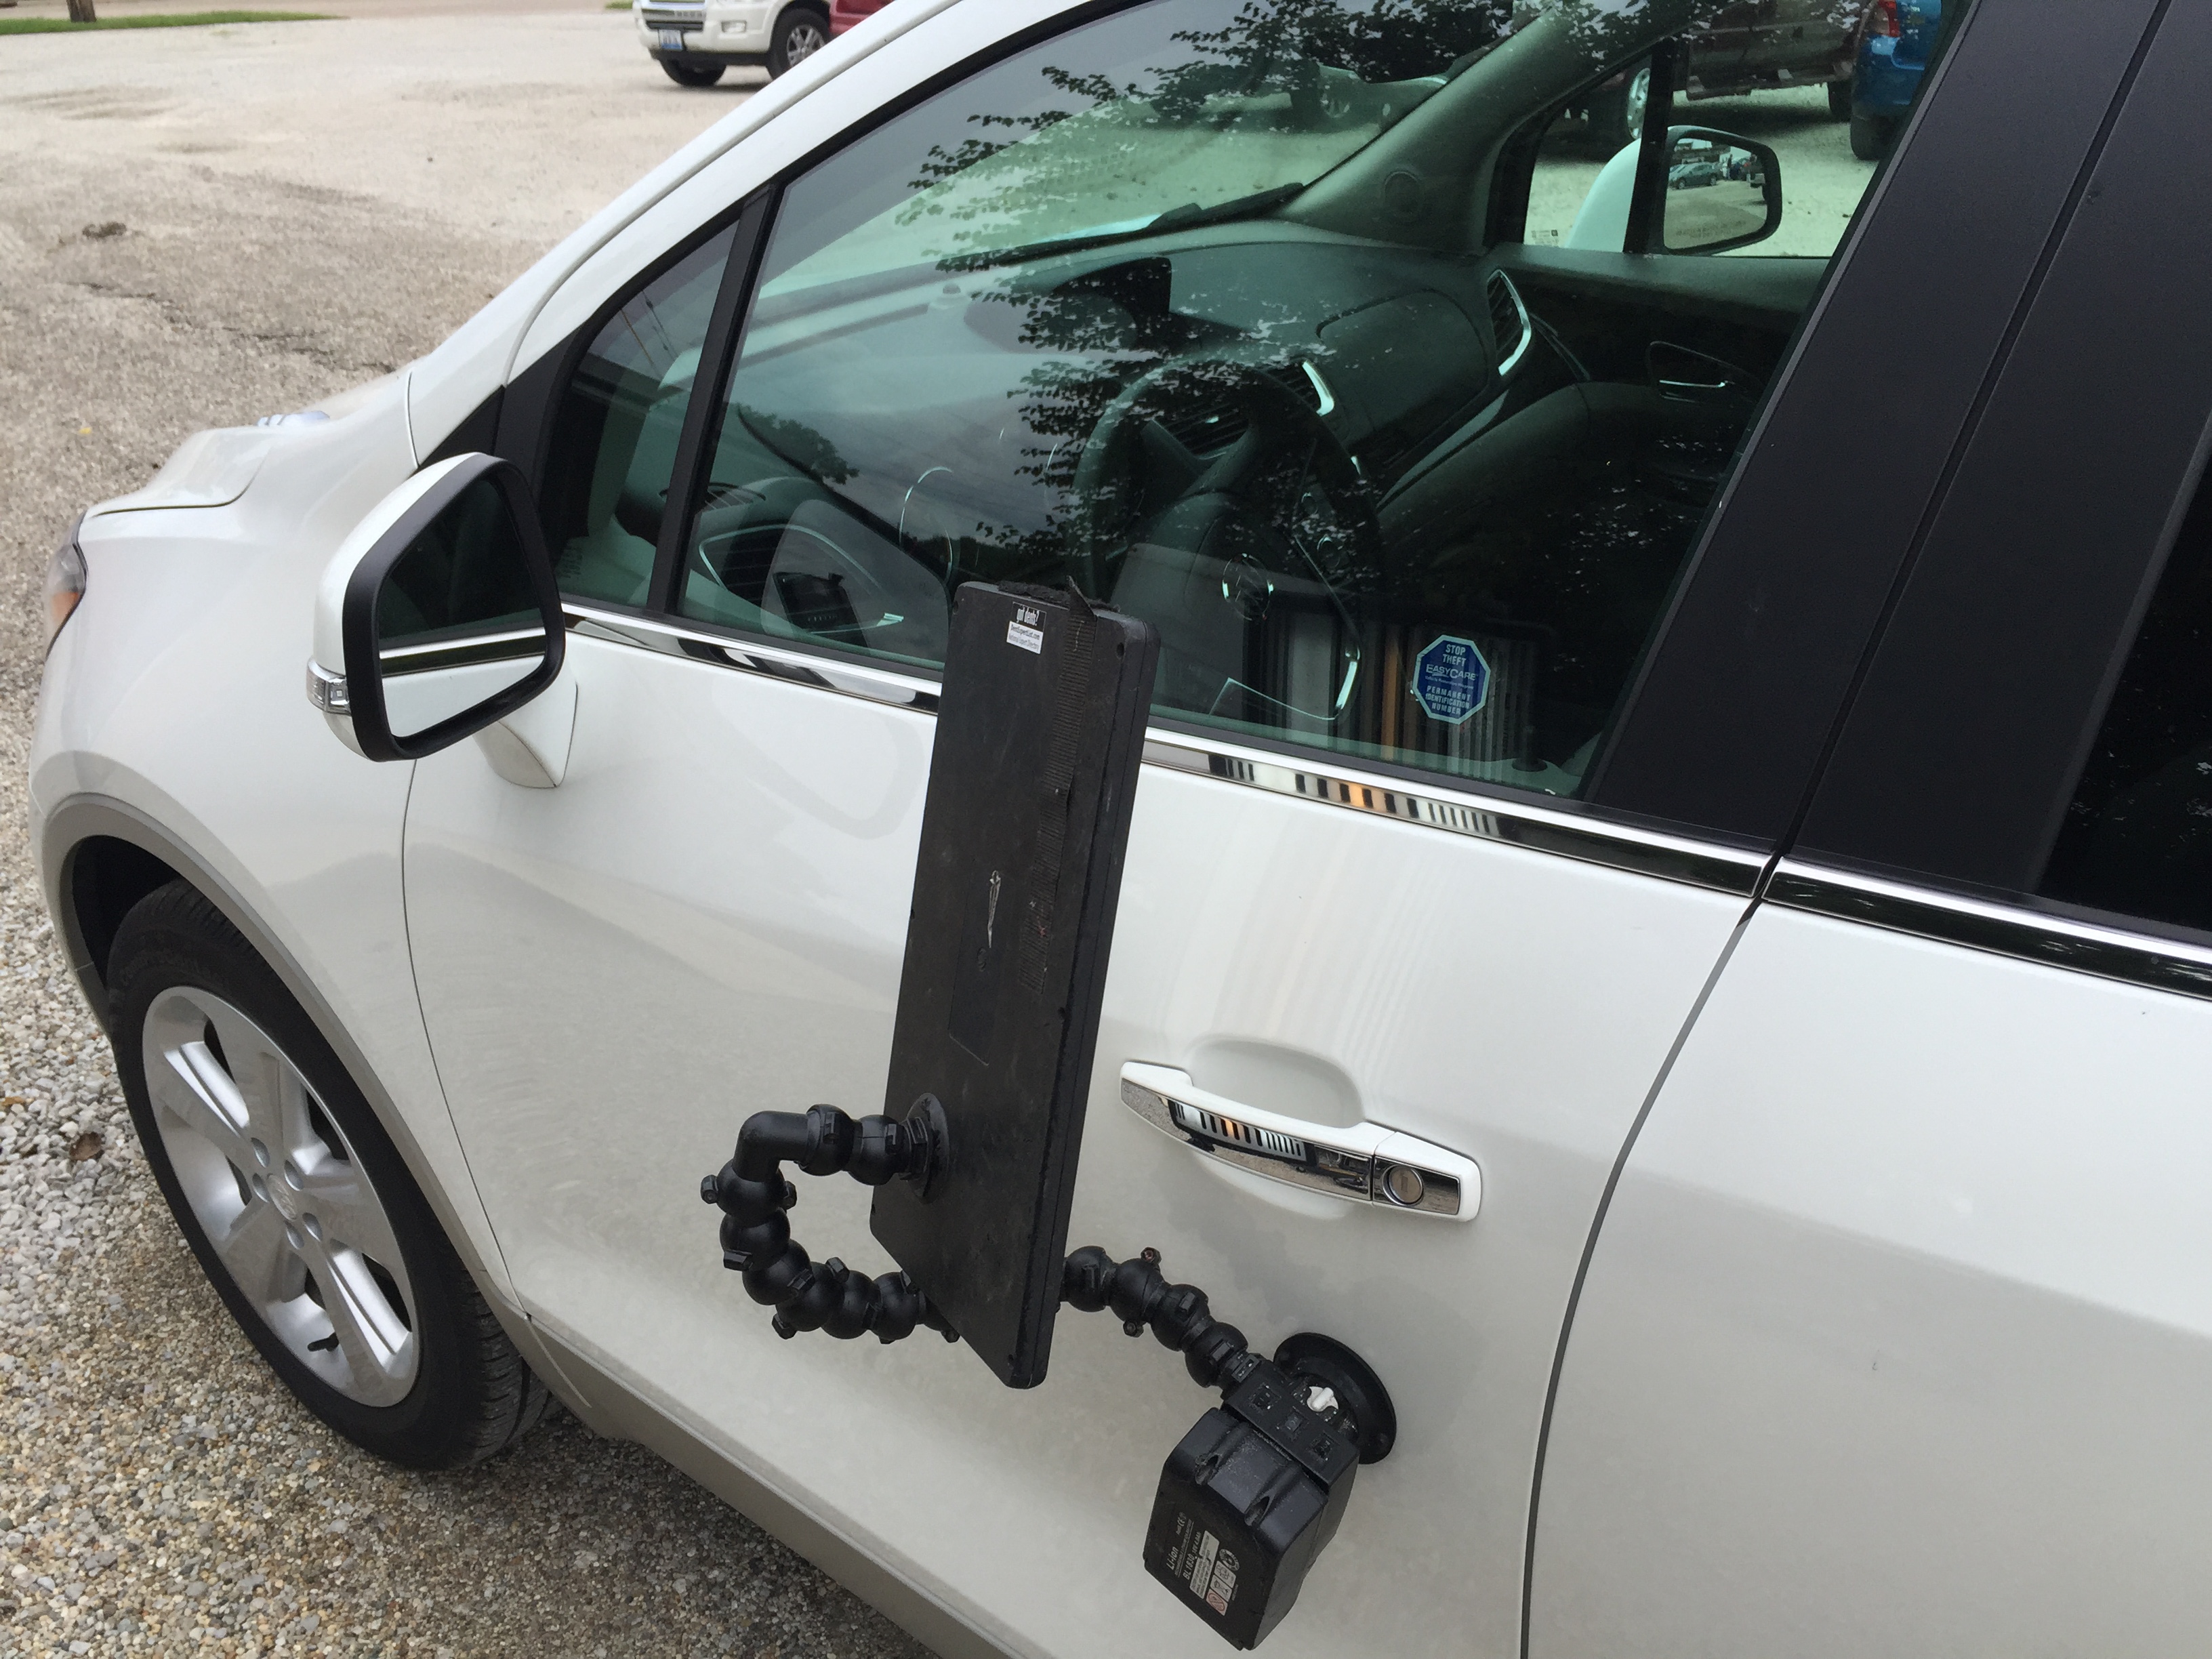 2015 Buick Encore, Dent Removal, Pana, IL. Dent in drivers door, http://217dent.com